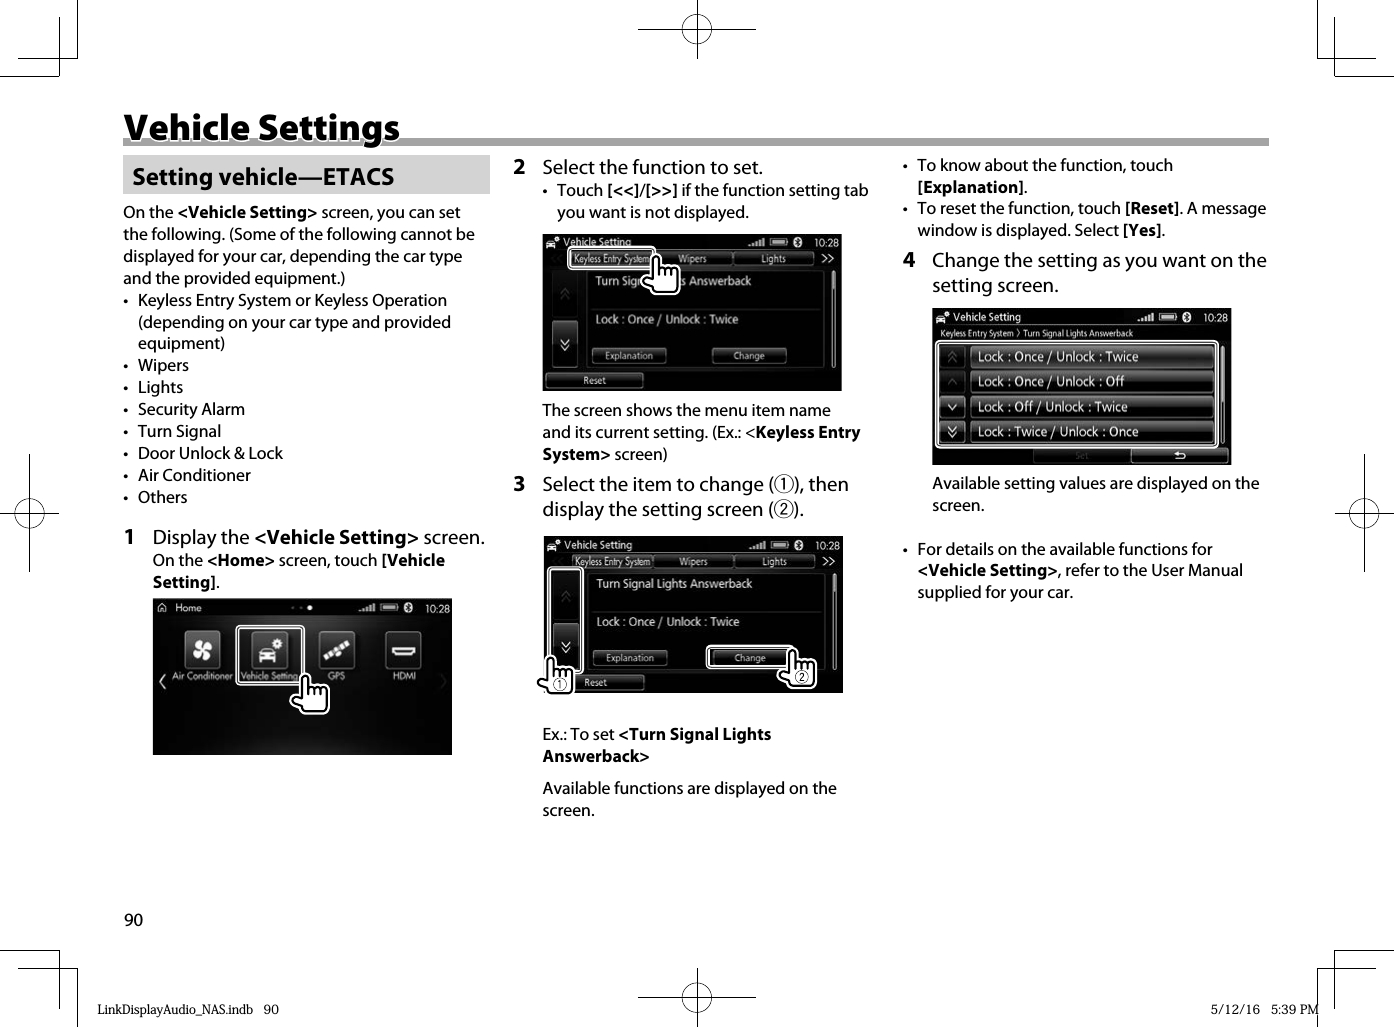 90Vehicle SettingsVehicle Settings Setting  vehicle—ETACSOn the &lt;Vehicle Setting&gt; screen, you can set the following. (Some of the following cannot be displayed for your car, depending the car type and the provided equipment.)•  Keyless Entry System or Keyless Operation (depending on your car type and provided equipment)• Wipers• Lights• Security Alarm• Turn Signal•  Door Unlock &amp; Lock• Air Conditioner• Others1 Display the &lt;Vehicle Setting&gt; screen.On the &lt;Home&gt; screen, touch [Vehicle Setting].2  Select the function to set.• Touch [&lt;&lt;]/[&gt;&gt;] if the function setting tab you want is not displayed.The screen shows the menu item name and its current setting. (Ex.: &lt;Keyless Entry System&gt; screen)3  Select the item to change (1), then display the setting screen (2).Ex.: To set &lt;Turn Signal Lights Answerback&gt;Available functions are displayed on the screen.•  To know about the function, touch [Explanation].•  To reset the function, touch [Reset]. A message window is displayed. Select [Yes].4  Change the setting as you want on the setting screen.Available setting values are displayed on the screen.•  For details on the available functions for &lt;Vehicle Setting&gt;, refer to the User Manual supplied for your car.LinkDisplayAudio_NAS.indb   90LinkDisplayAudio_NAS.indb   90 5/12/16   5:39 PM5/12/16   5:39 PM